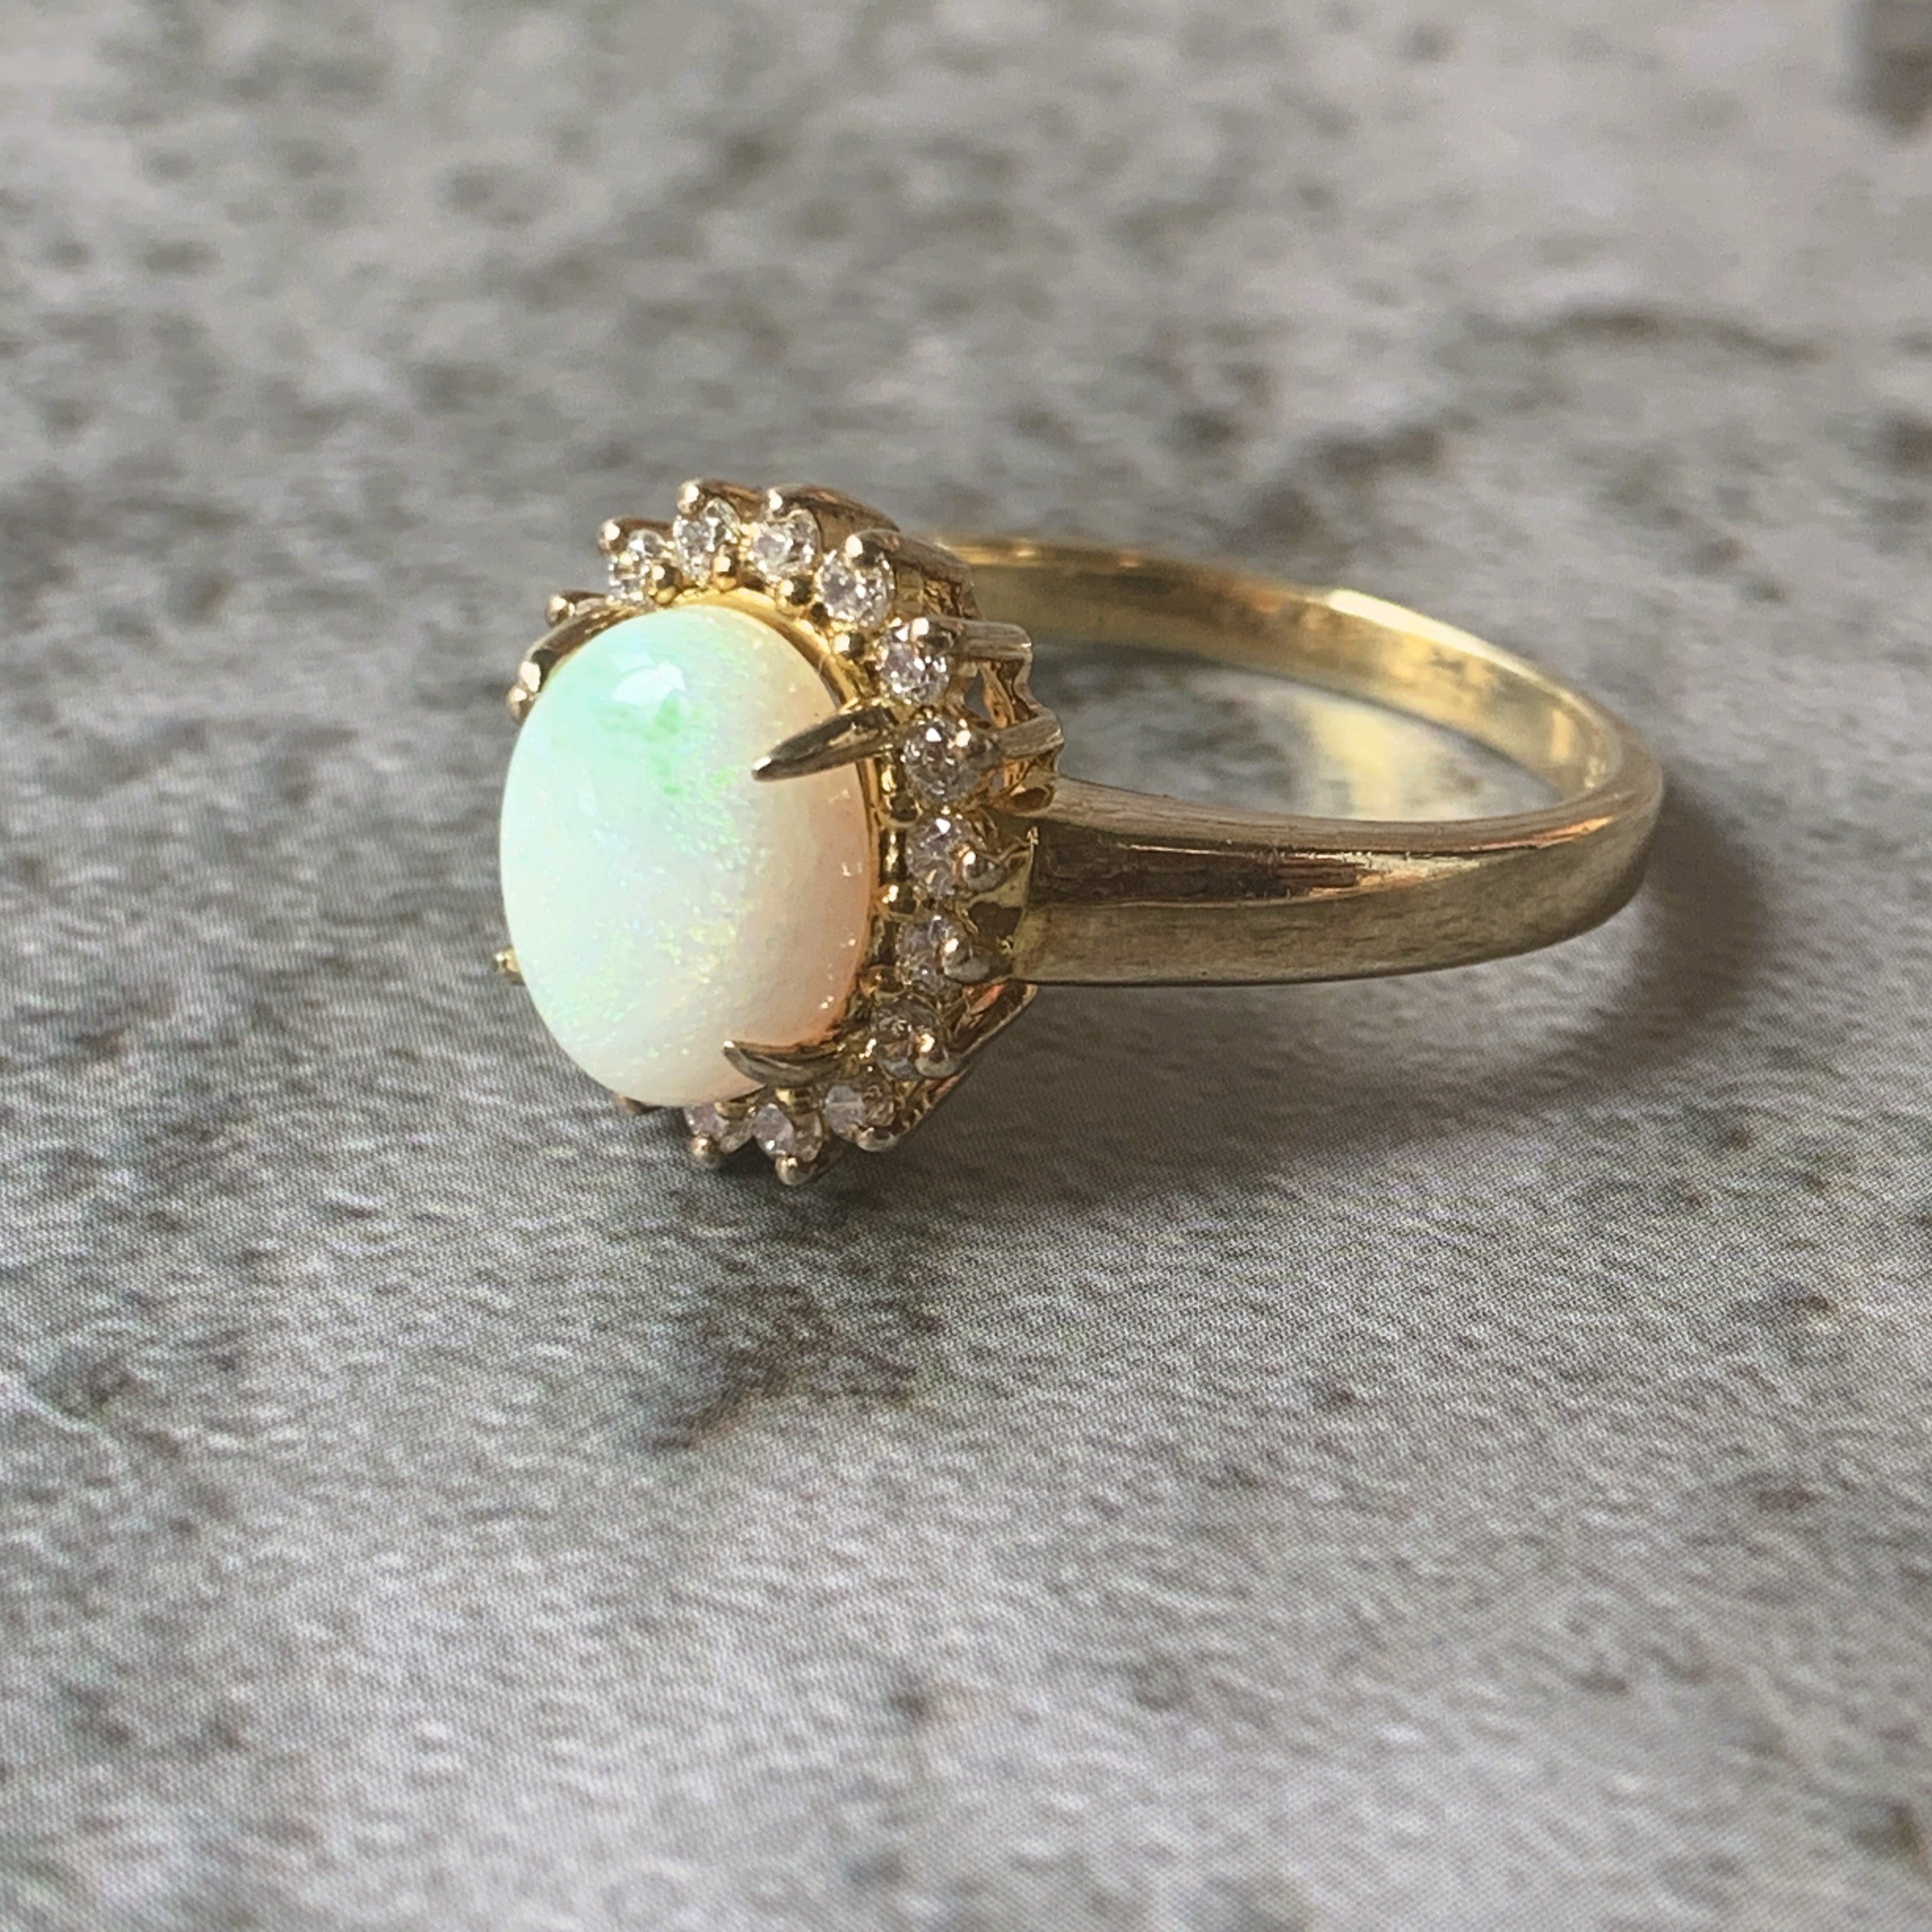 Gold Plated Sterling Silver Opal 9x7mm and cubic zirconia cluster ring - Masterpiece Jewellery Opal & Gems Sydney Australia | Online Shop